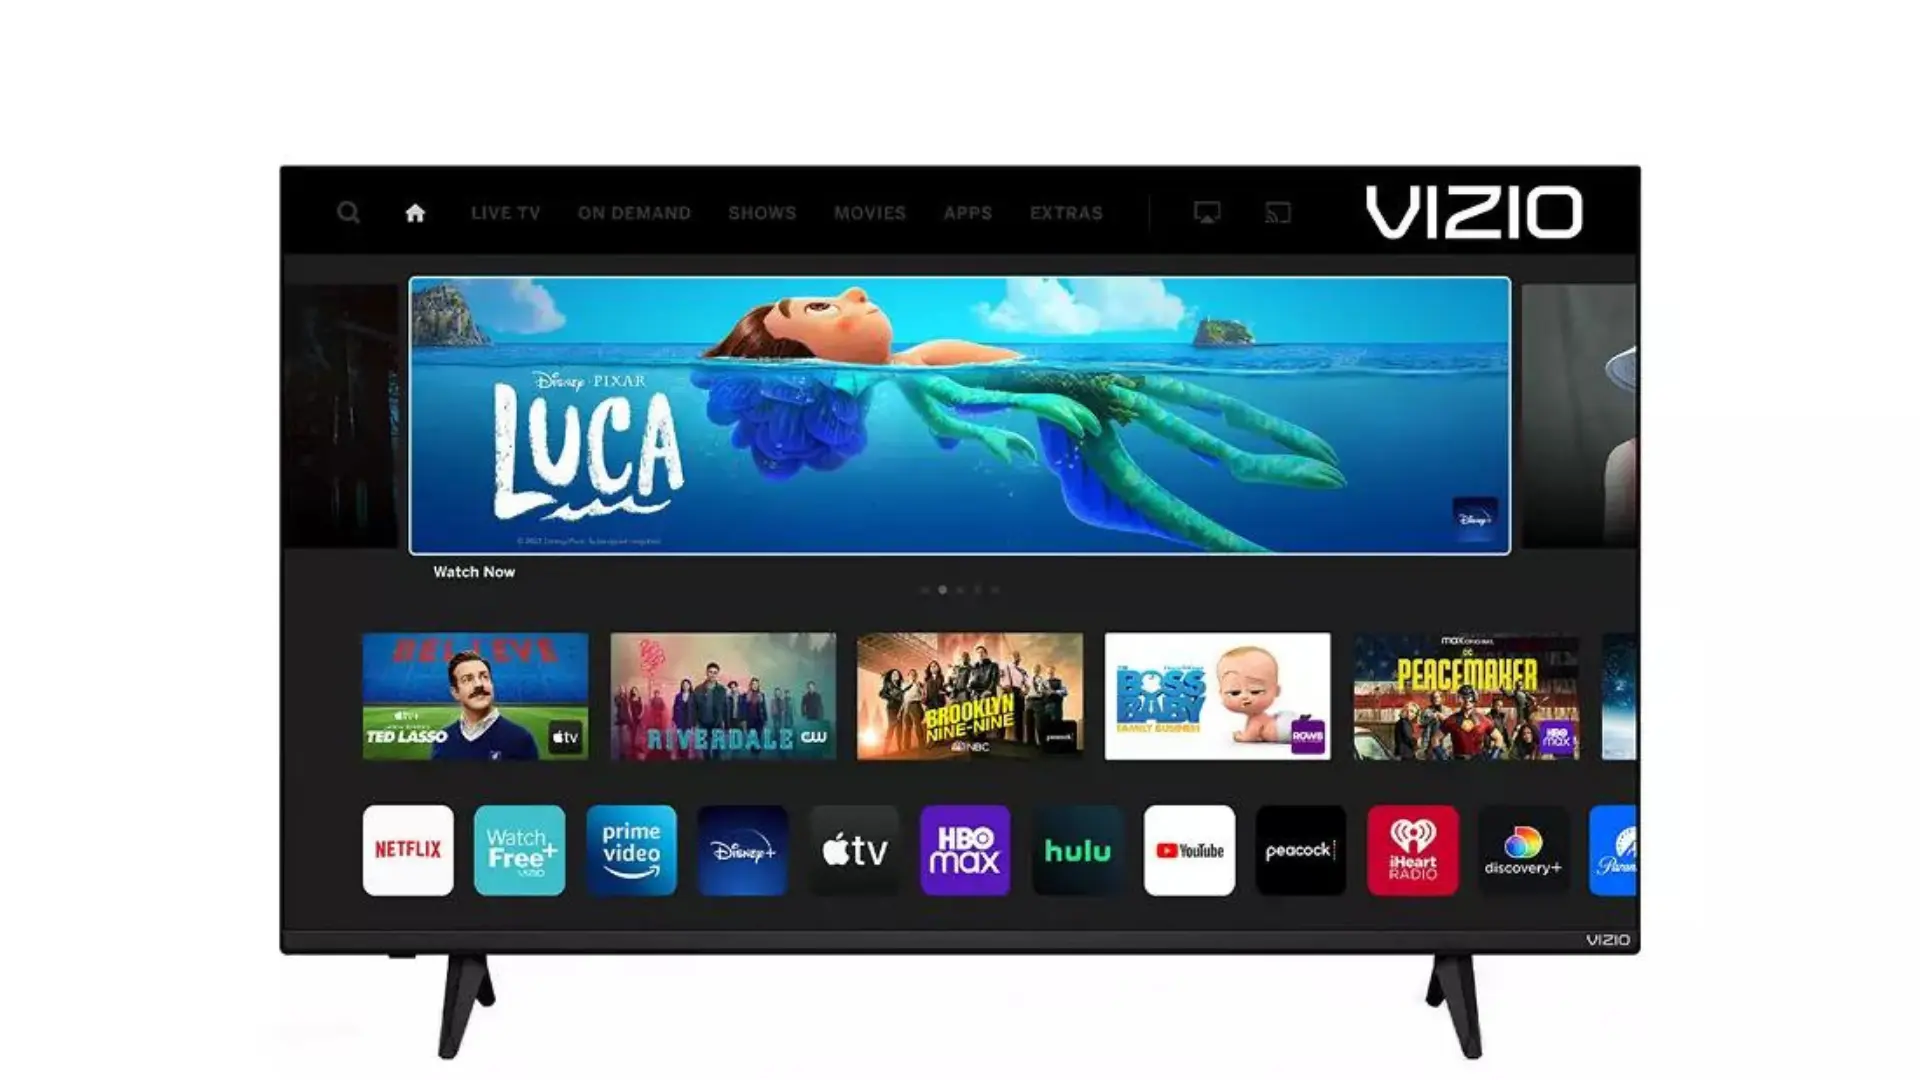 How to Fix Vizio TV Stuck On Terms and Conditions